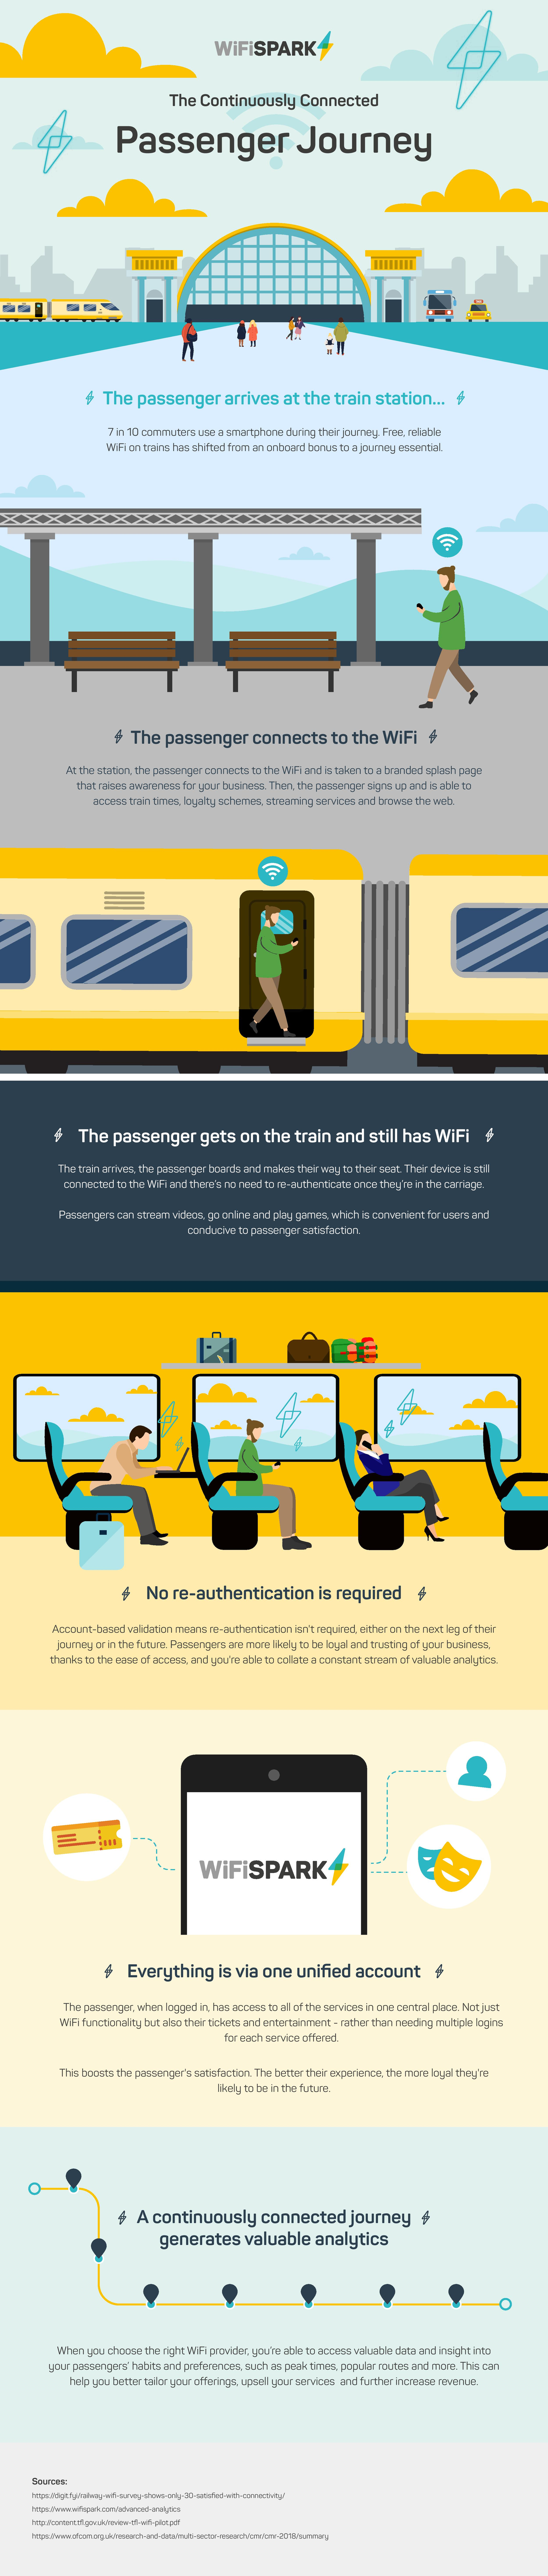 WFS020_railway-infographic_V2.0-page-001